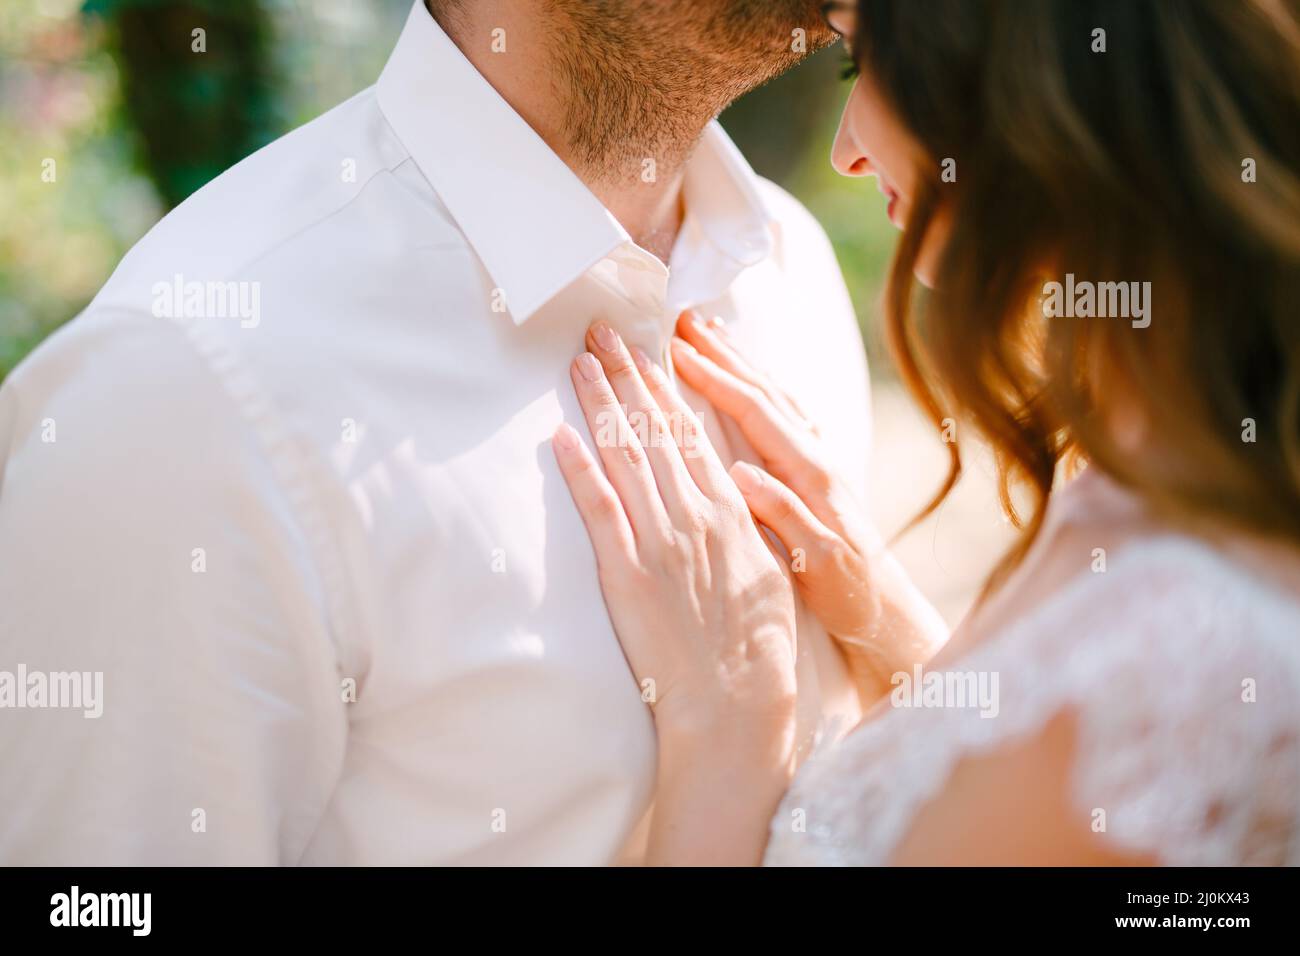 The groom hugs gently kisses the bride on the forehead, the bride puts her hands on grooms chest Stock Photo